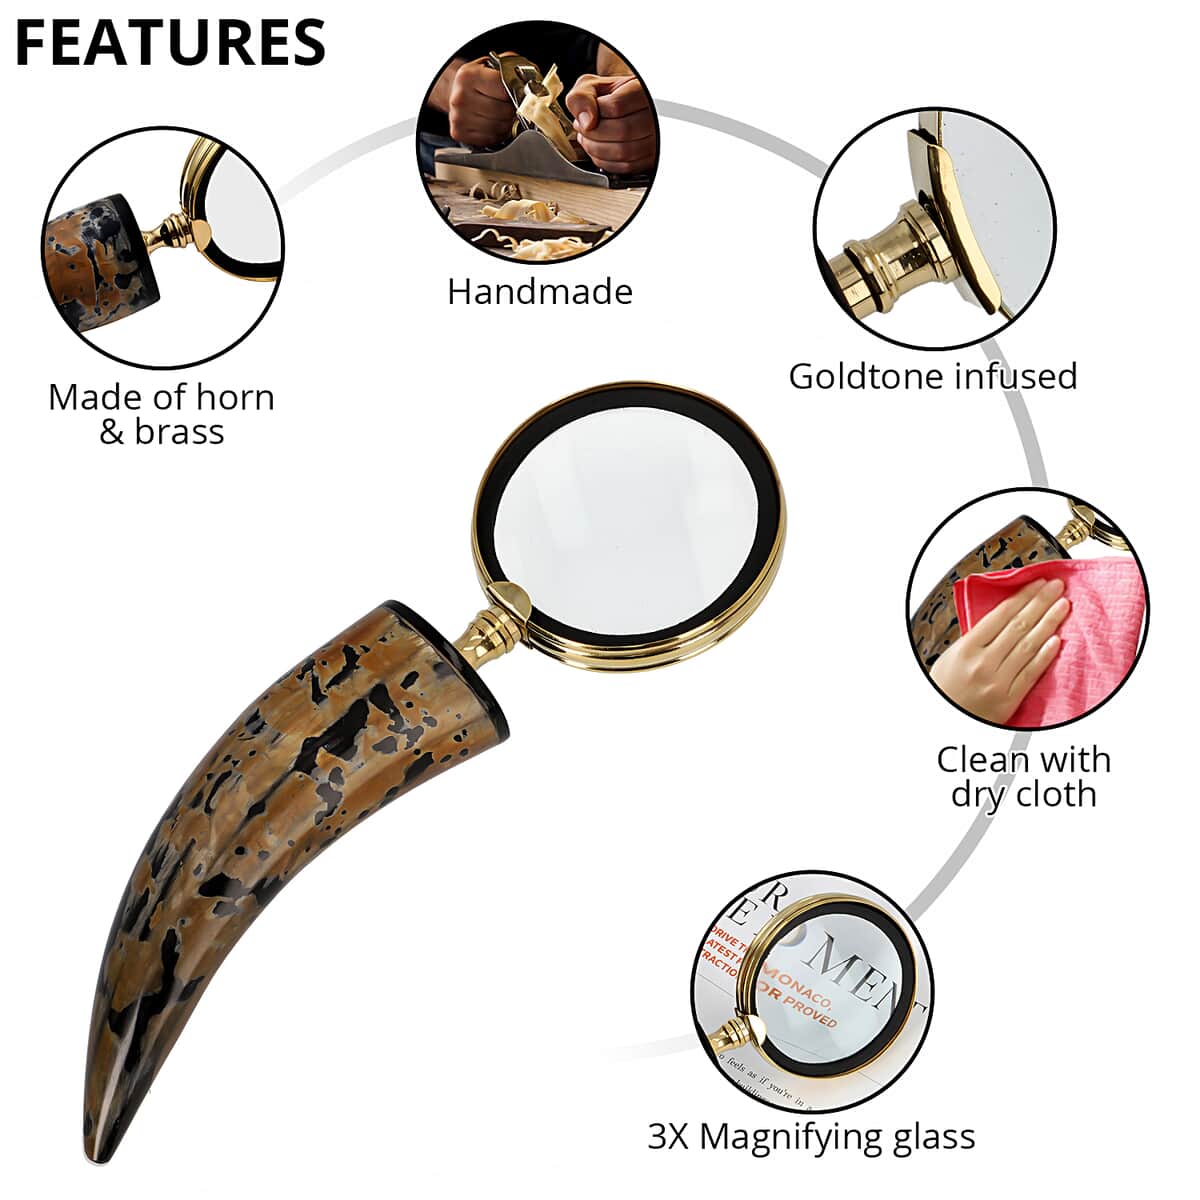 Handcrafted Goldtone 3X Magnifying Glass with Buffalo Horn Handle image number 2